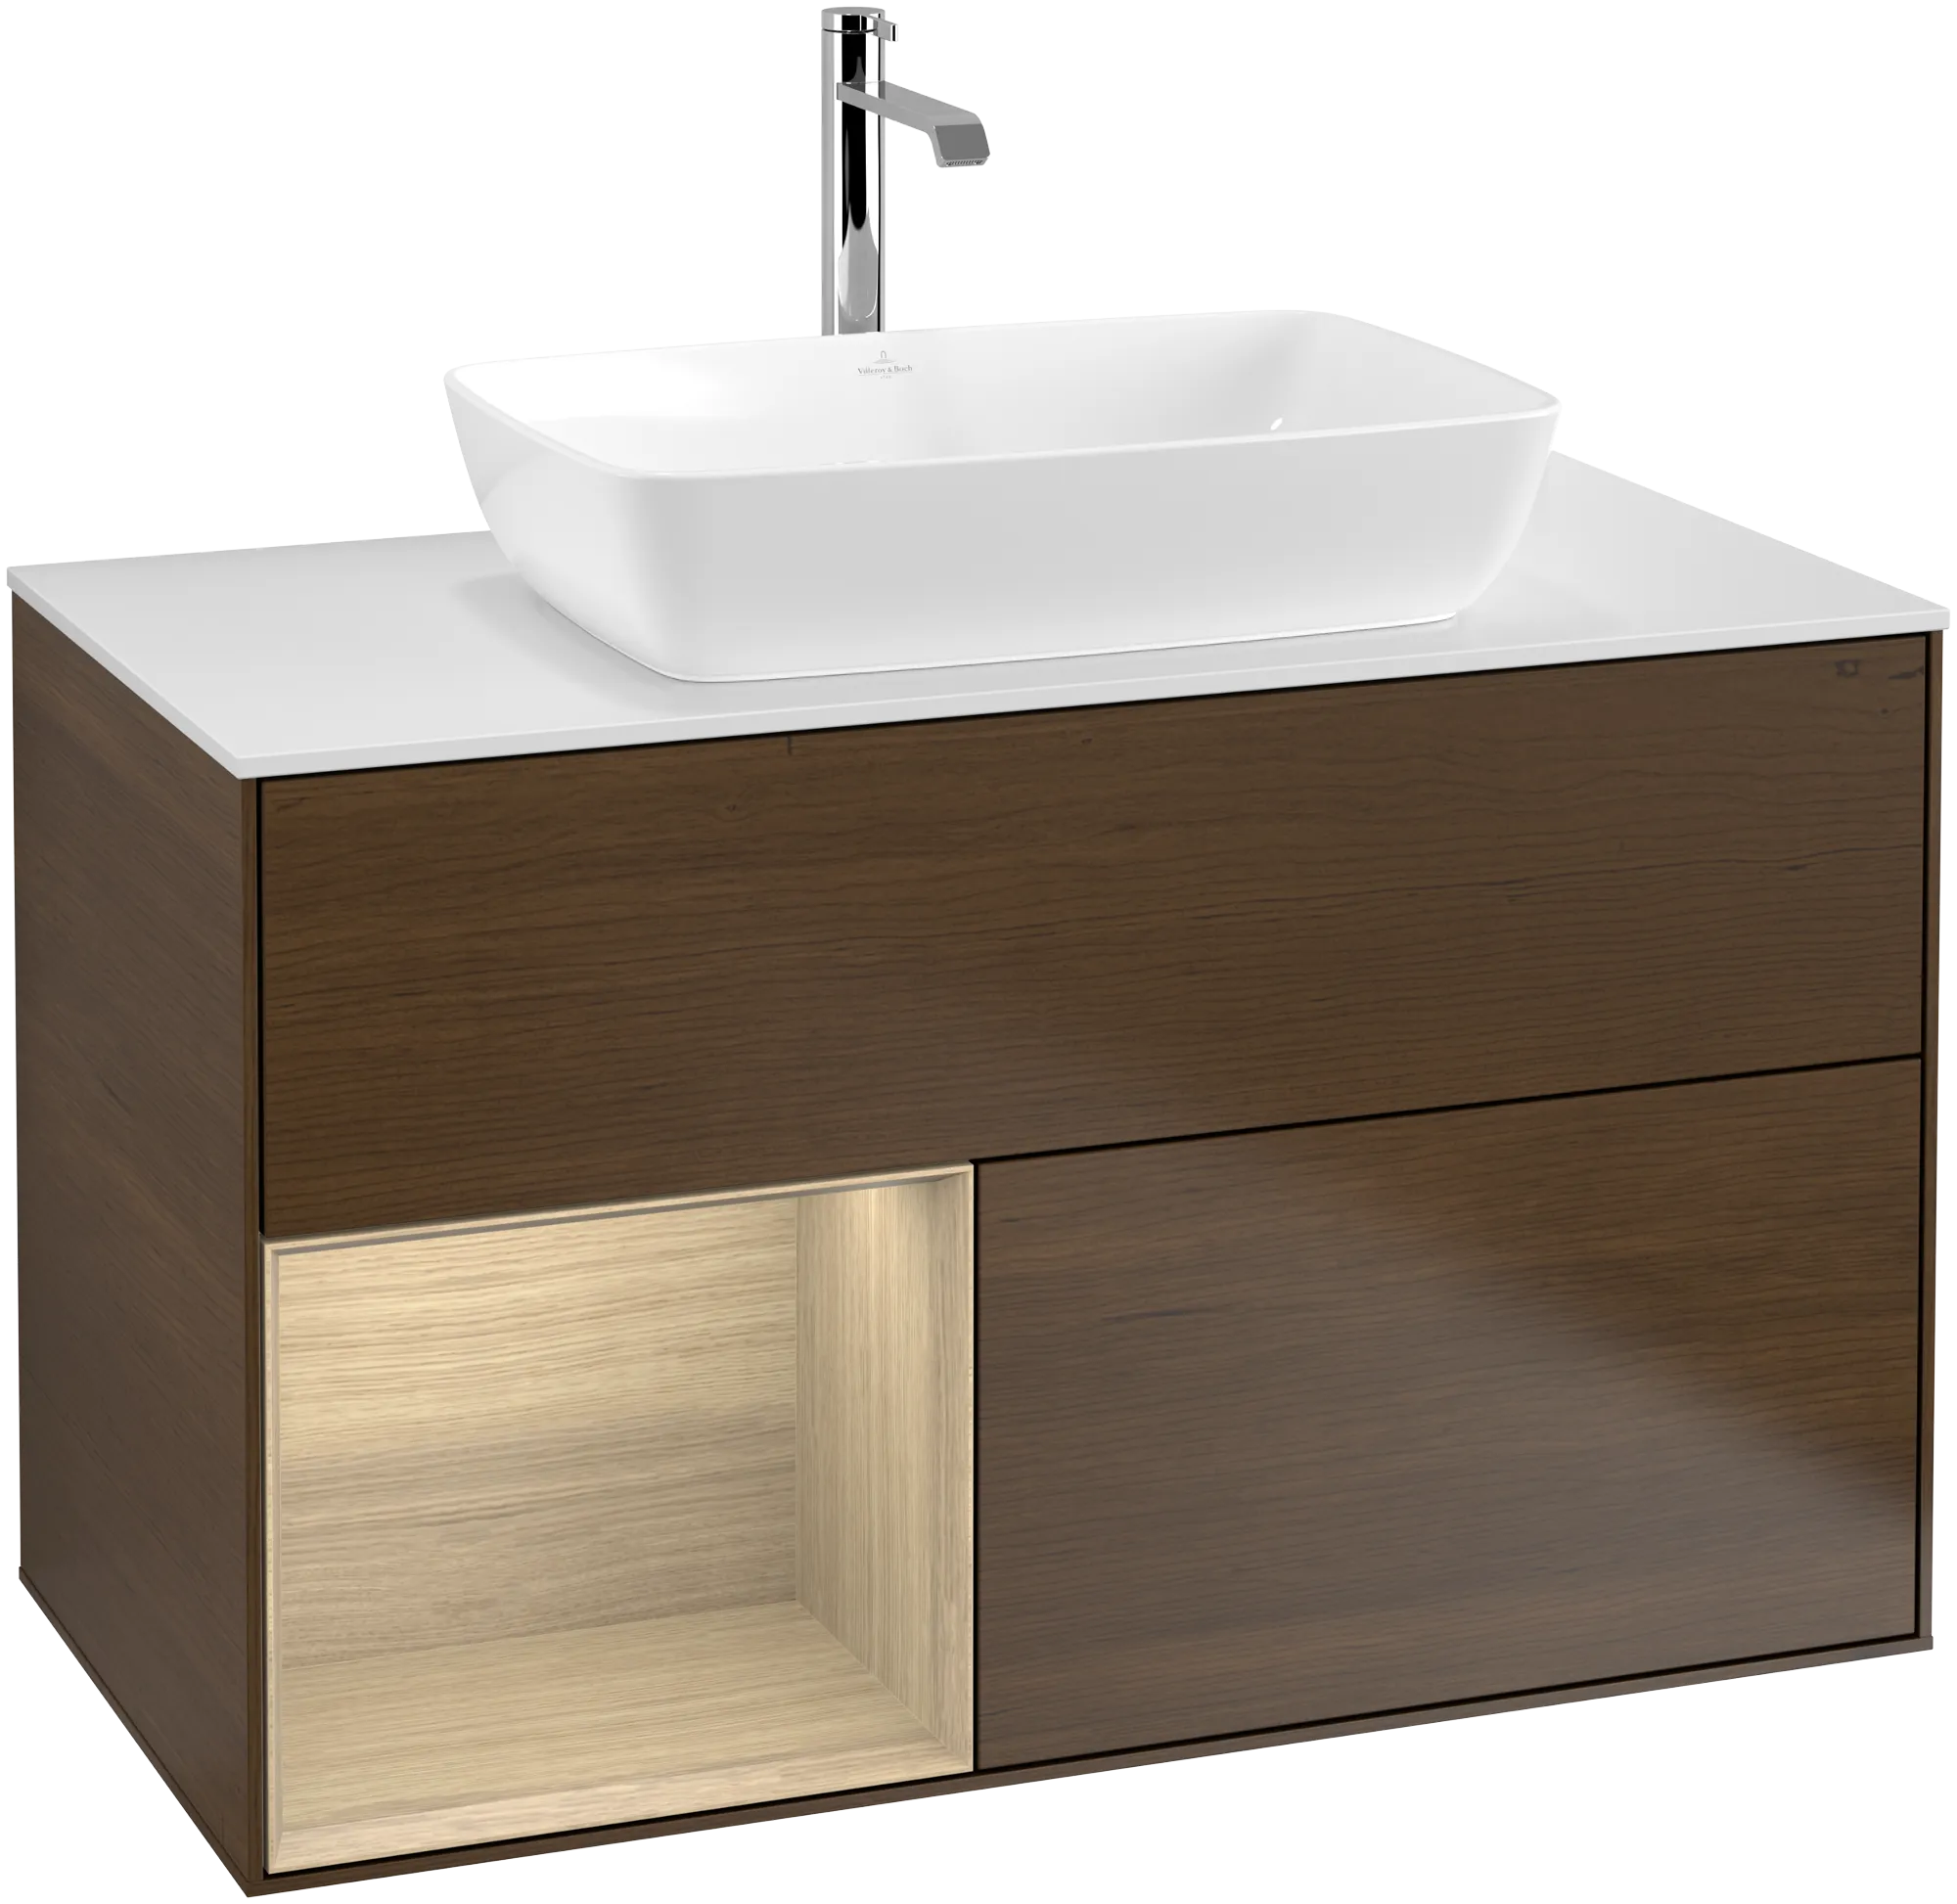 Picture of VILLEROY BOCH Finion Vanity unit, with lighting, 2 pull-out compartments, 1000 x 603 x 501 mm, Walnut Veneer / Oak Veneer / Glass White Matt #G771PCGN